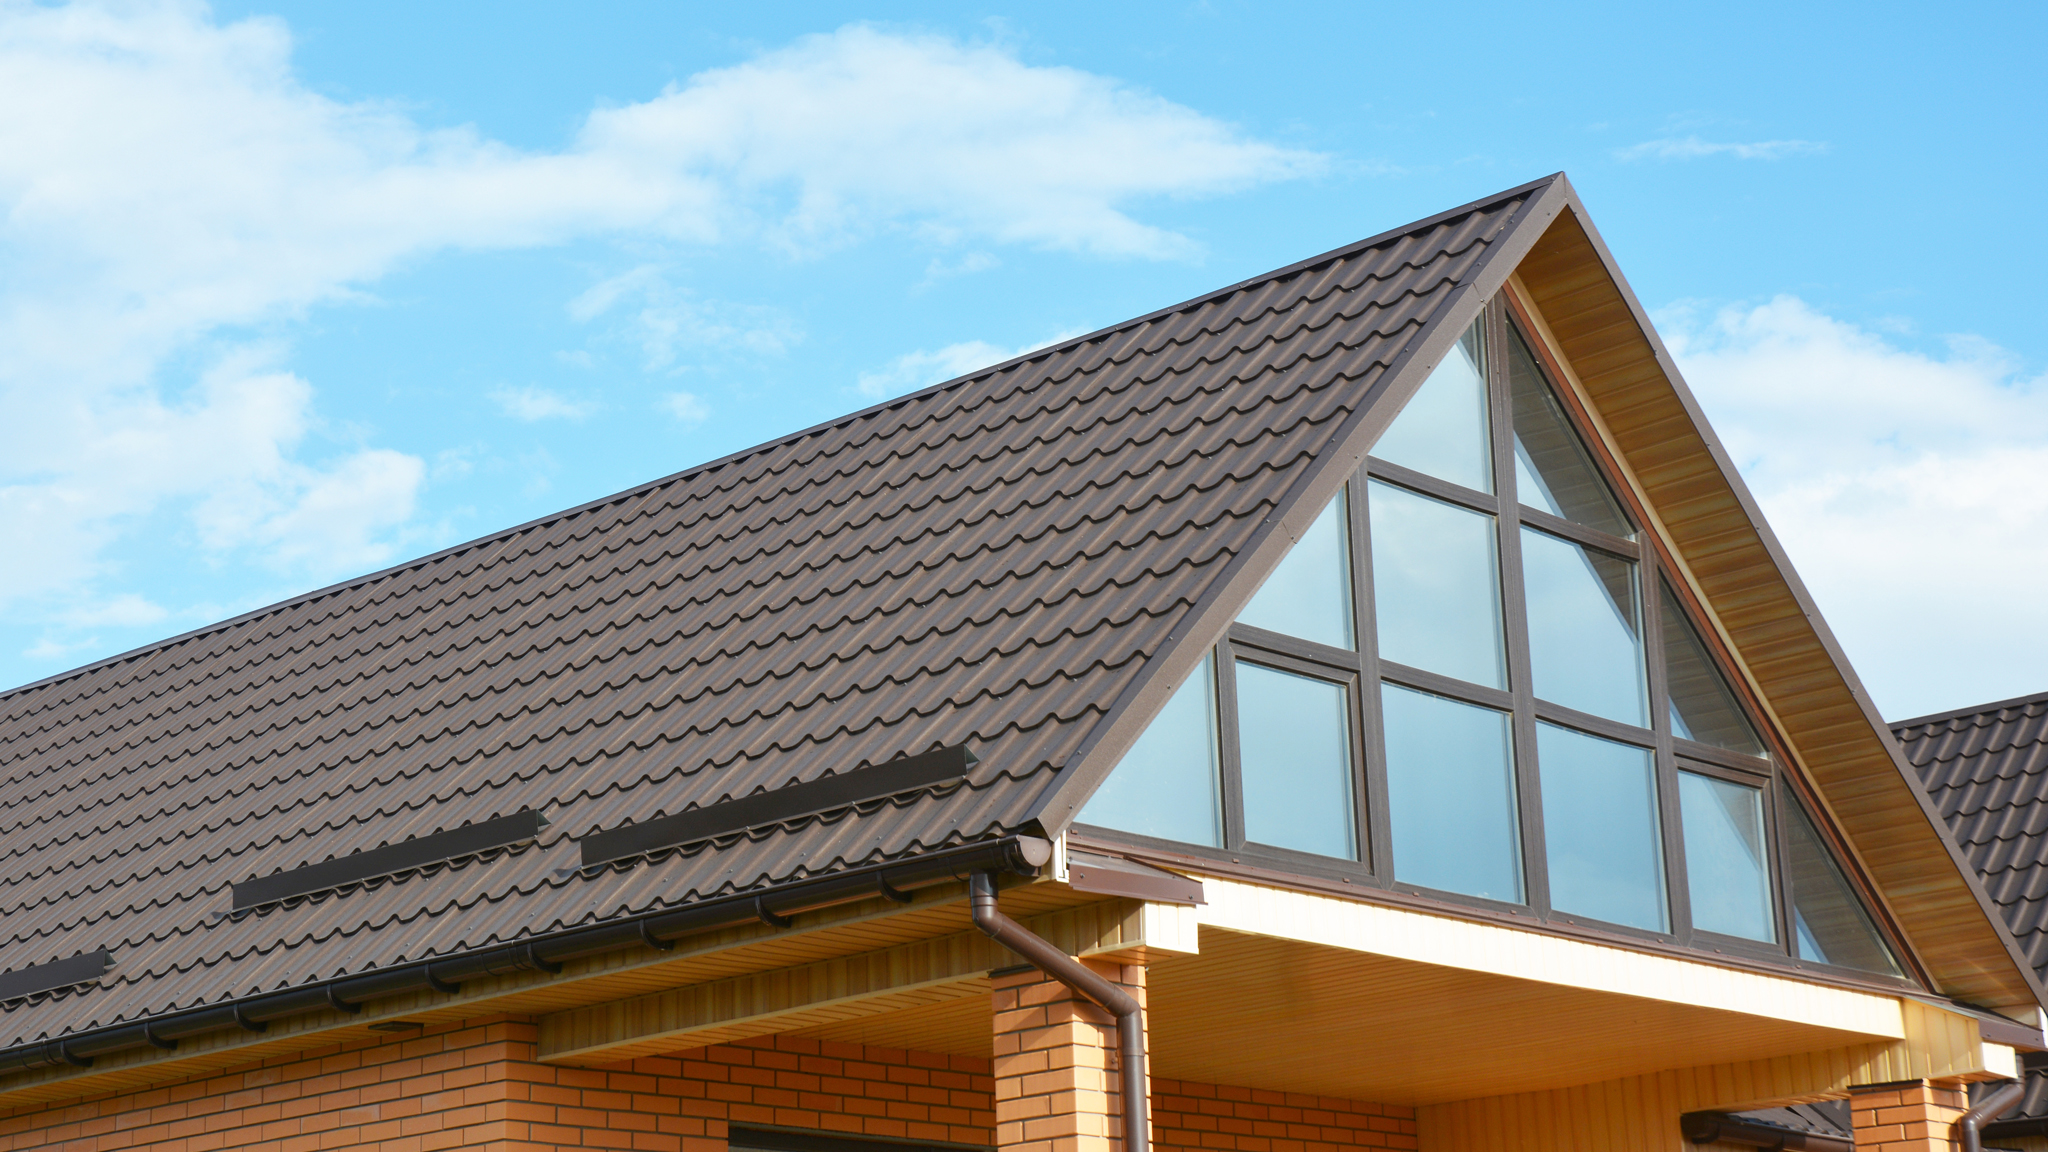 sloped roof with brown stamped metal roof panels simulating a clay tile appearance